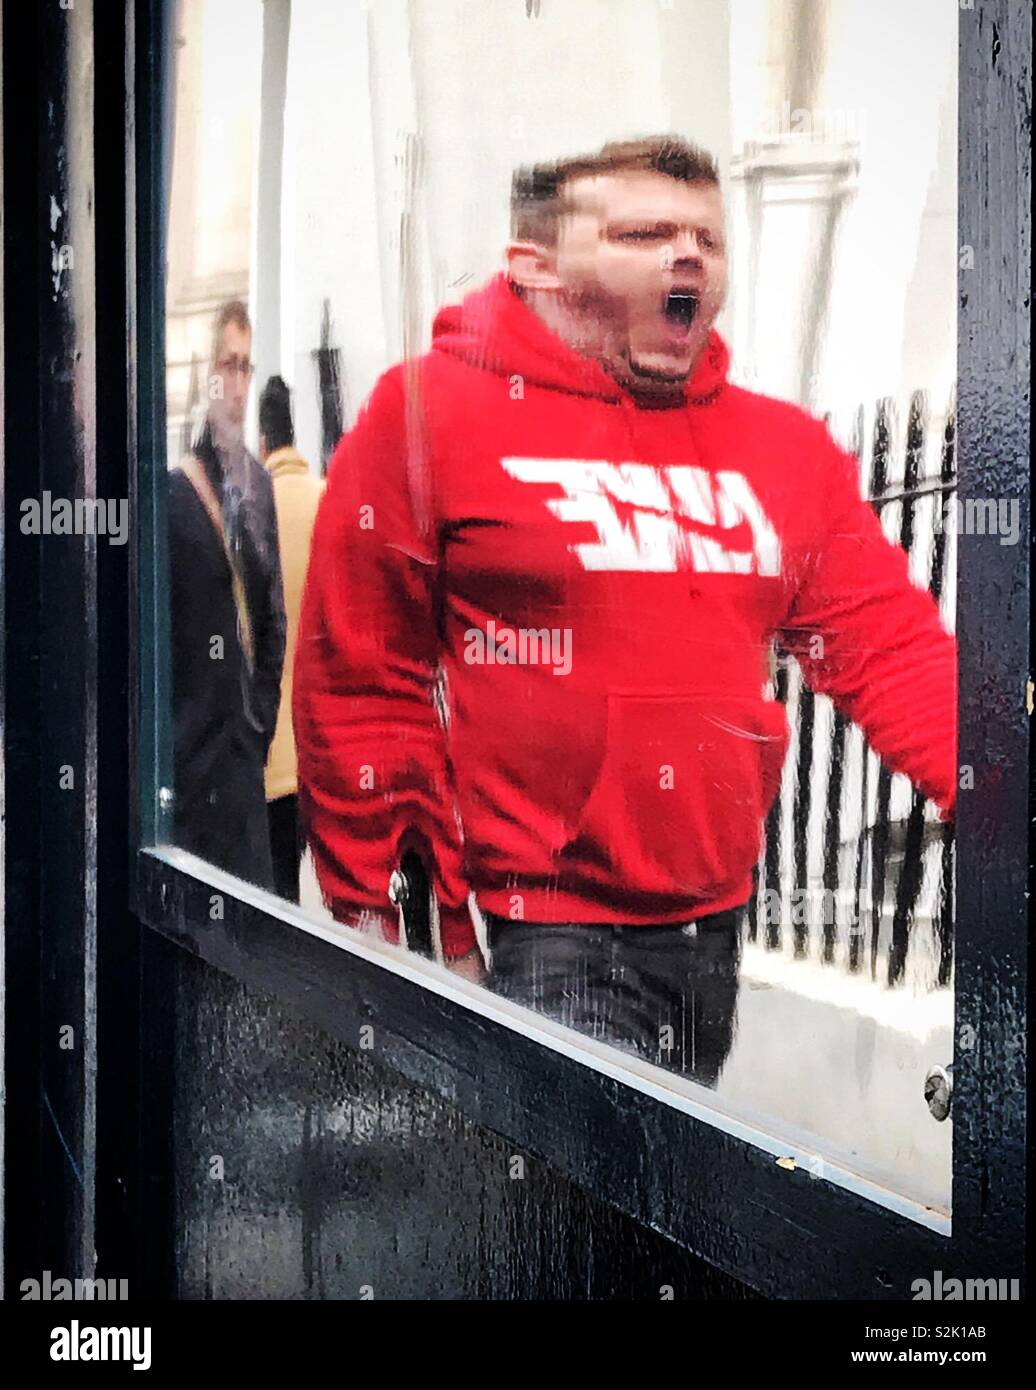 Big yawn on the way home after work. Reflection in mirror in bright red hoodie caught yawning. Distorted reflection like in amusement arcade. Stock Photo